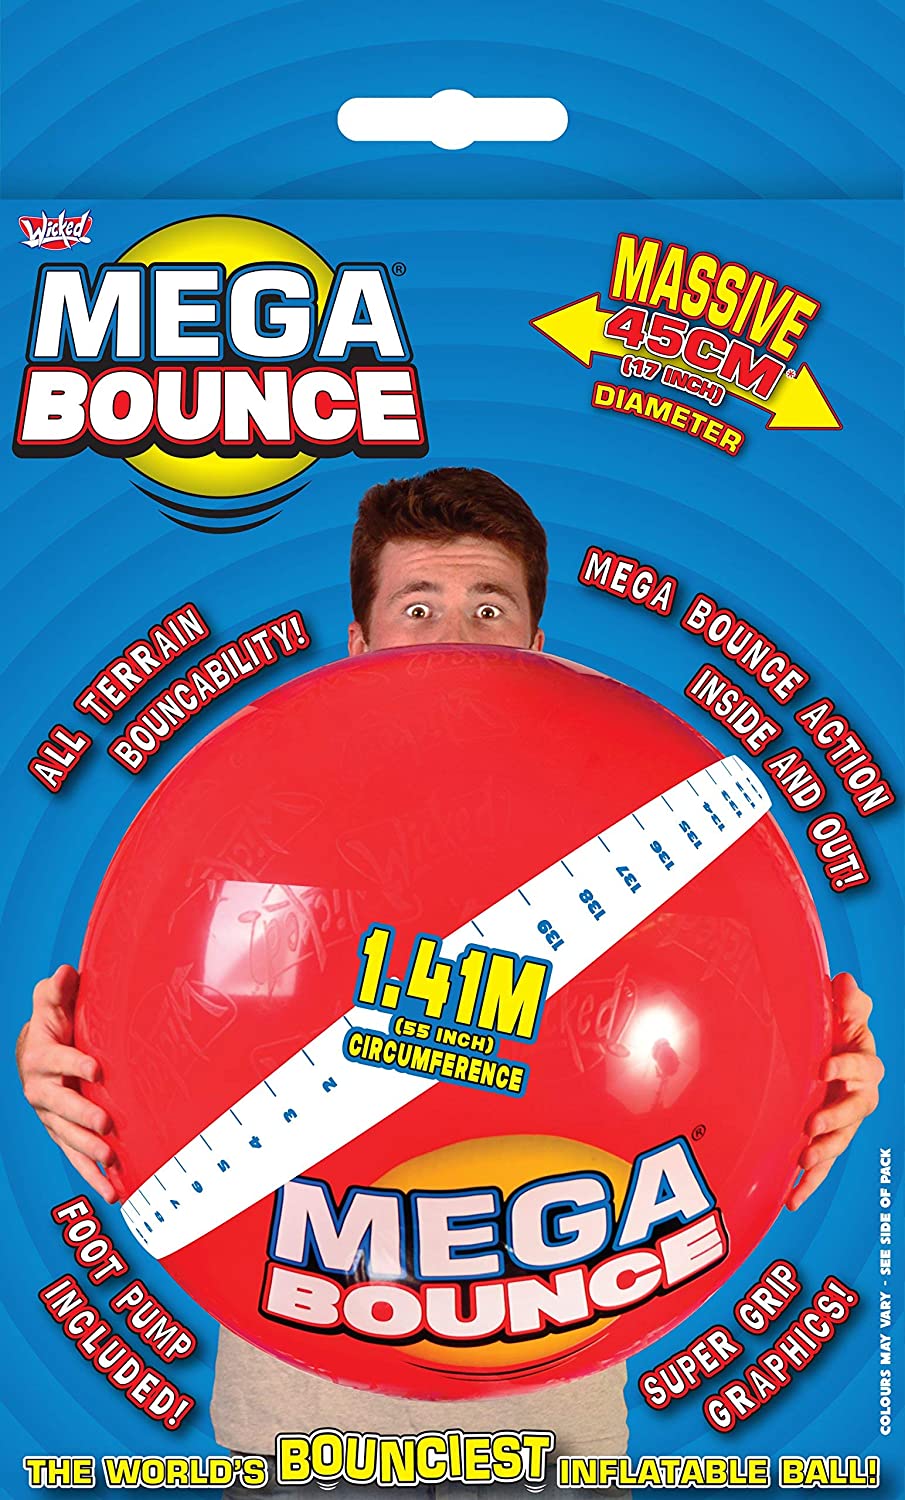 Balle gonflable Wicked Mega Bounce Junior